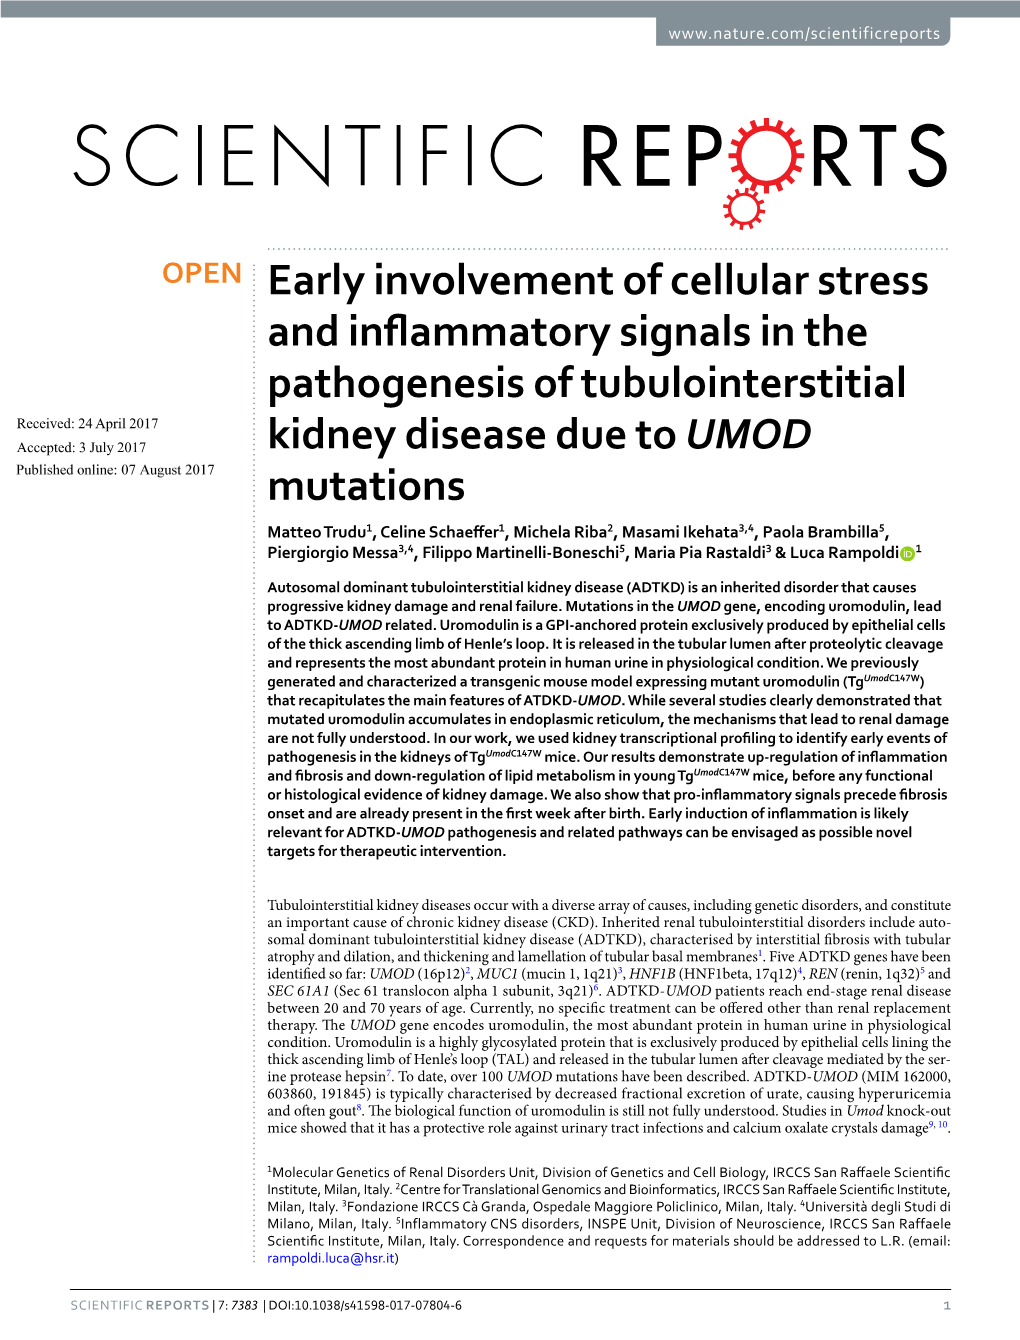 Early Involvement of Cellular Stress and Inflammatory Signals In